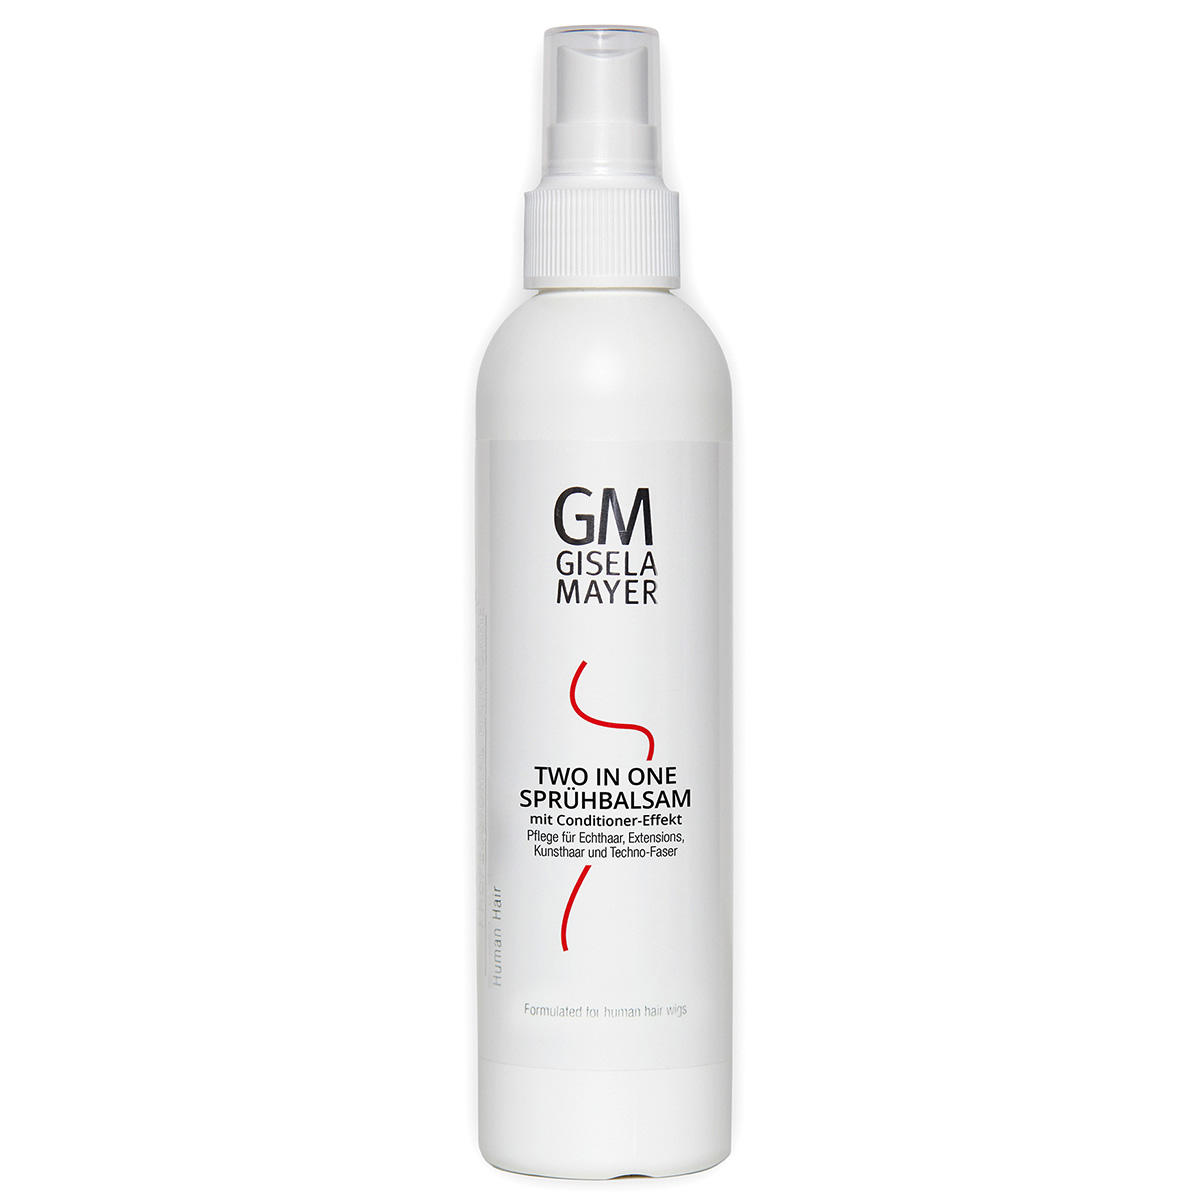 Gisela Mayer Two in One 200 ml - 1